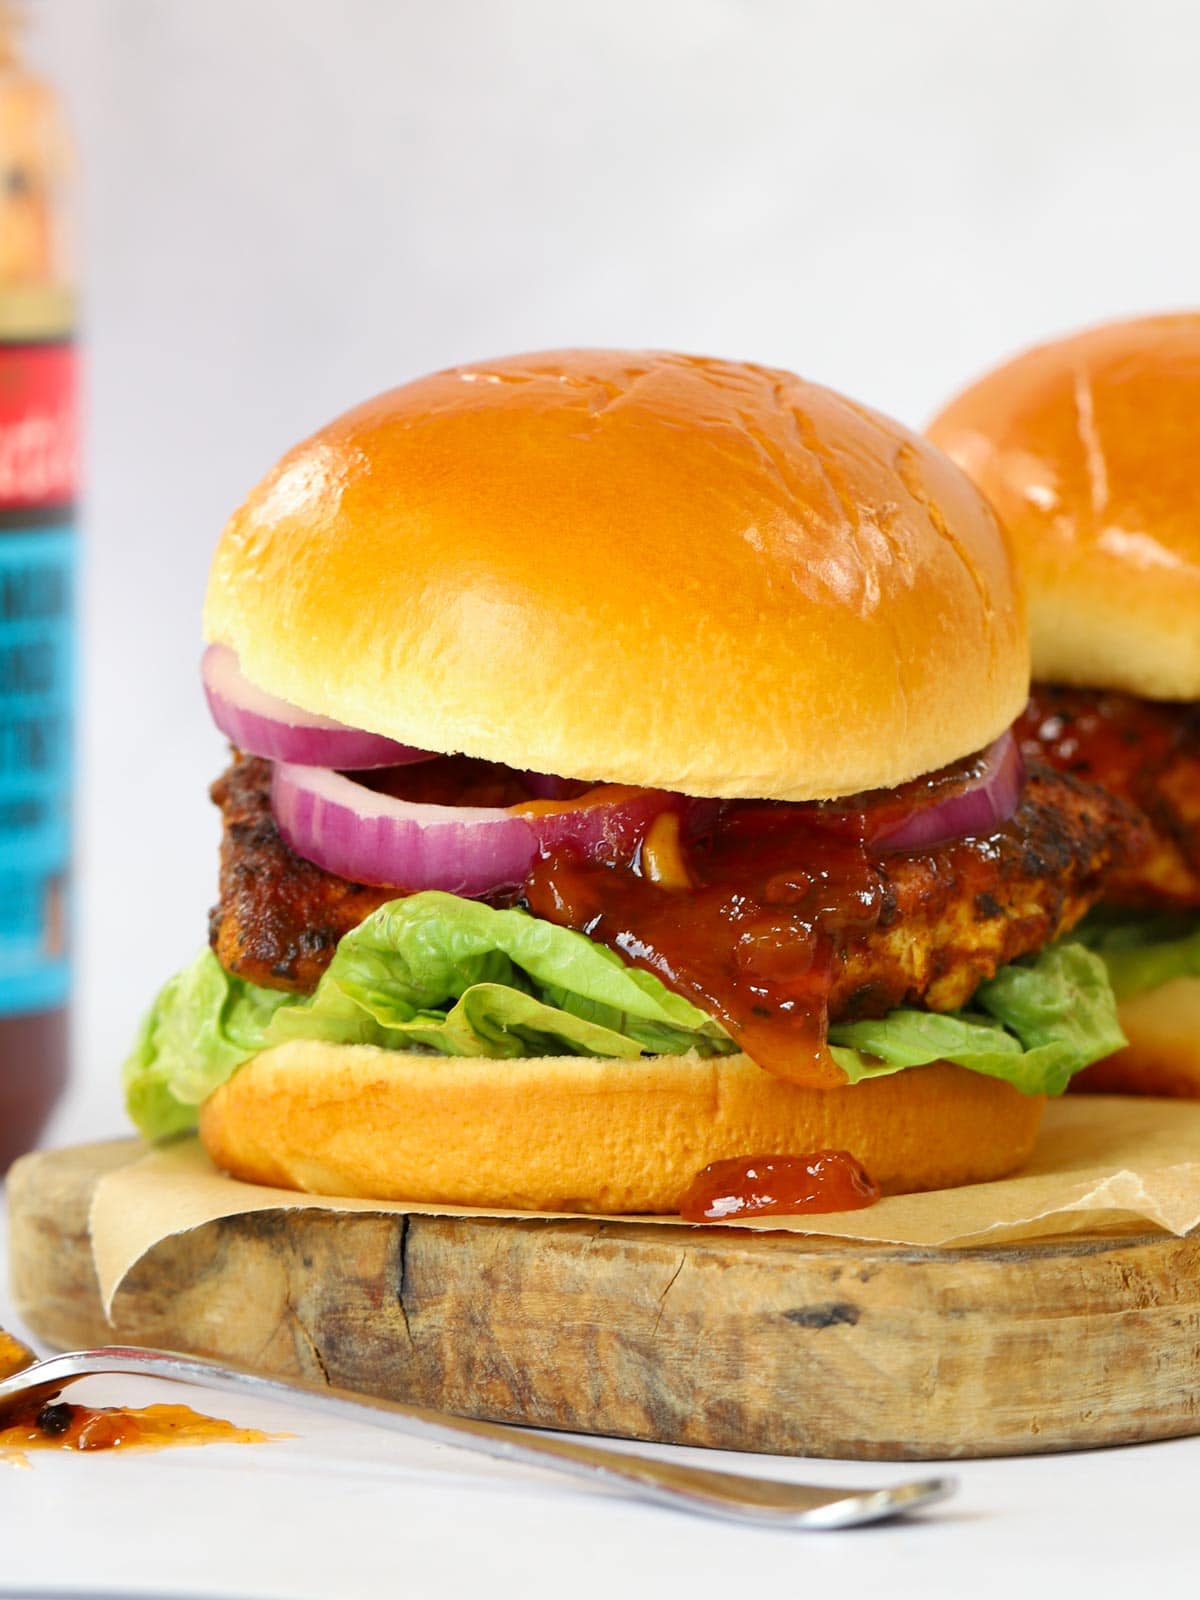 These Chicken Tikka Burgers are so tasty and so easy to make. Here is the recipe.